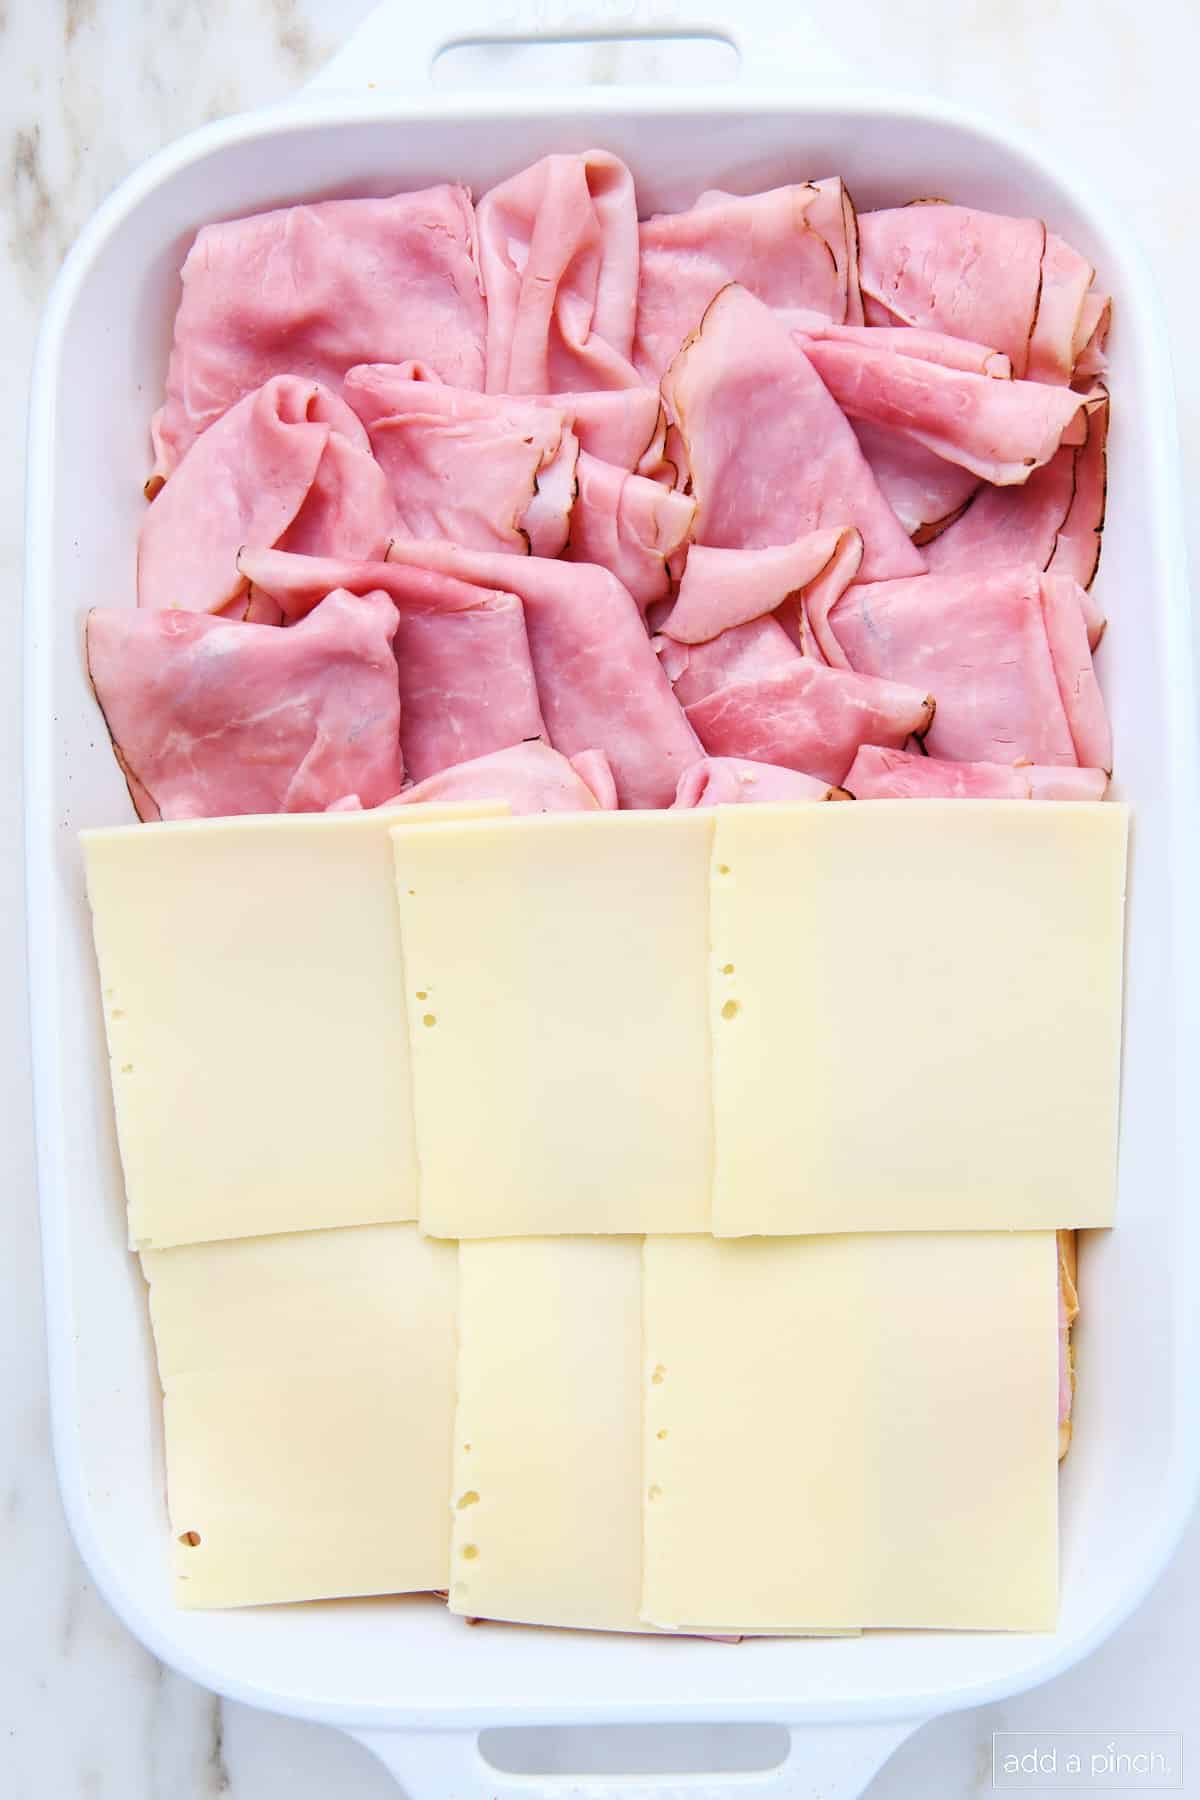 Swiss cheese being layered onto slices of ham and rolls in a 9x13 baking dish.